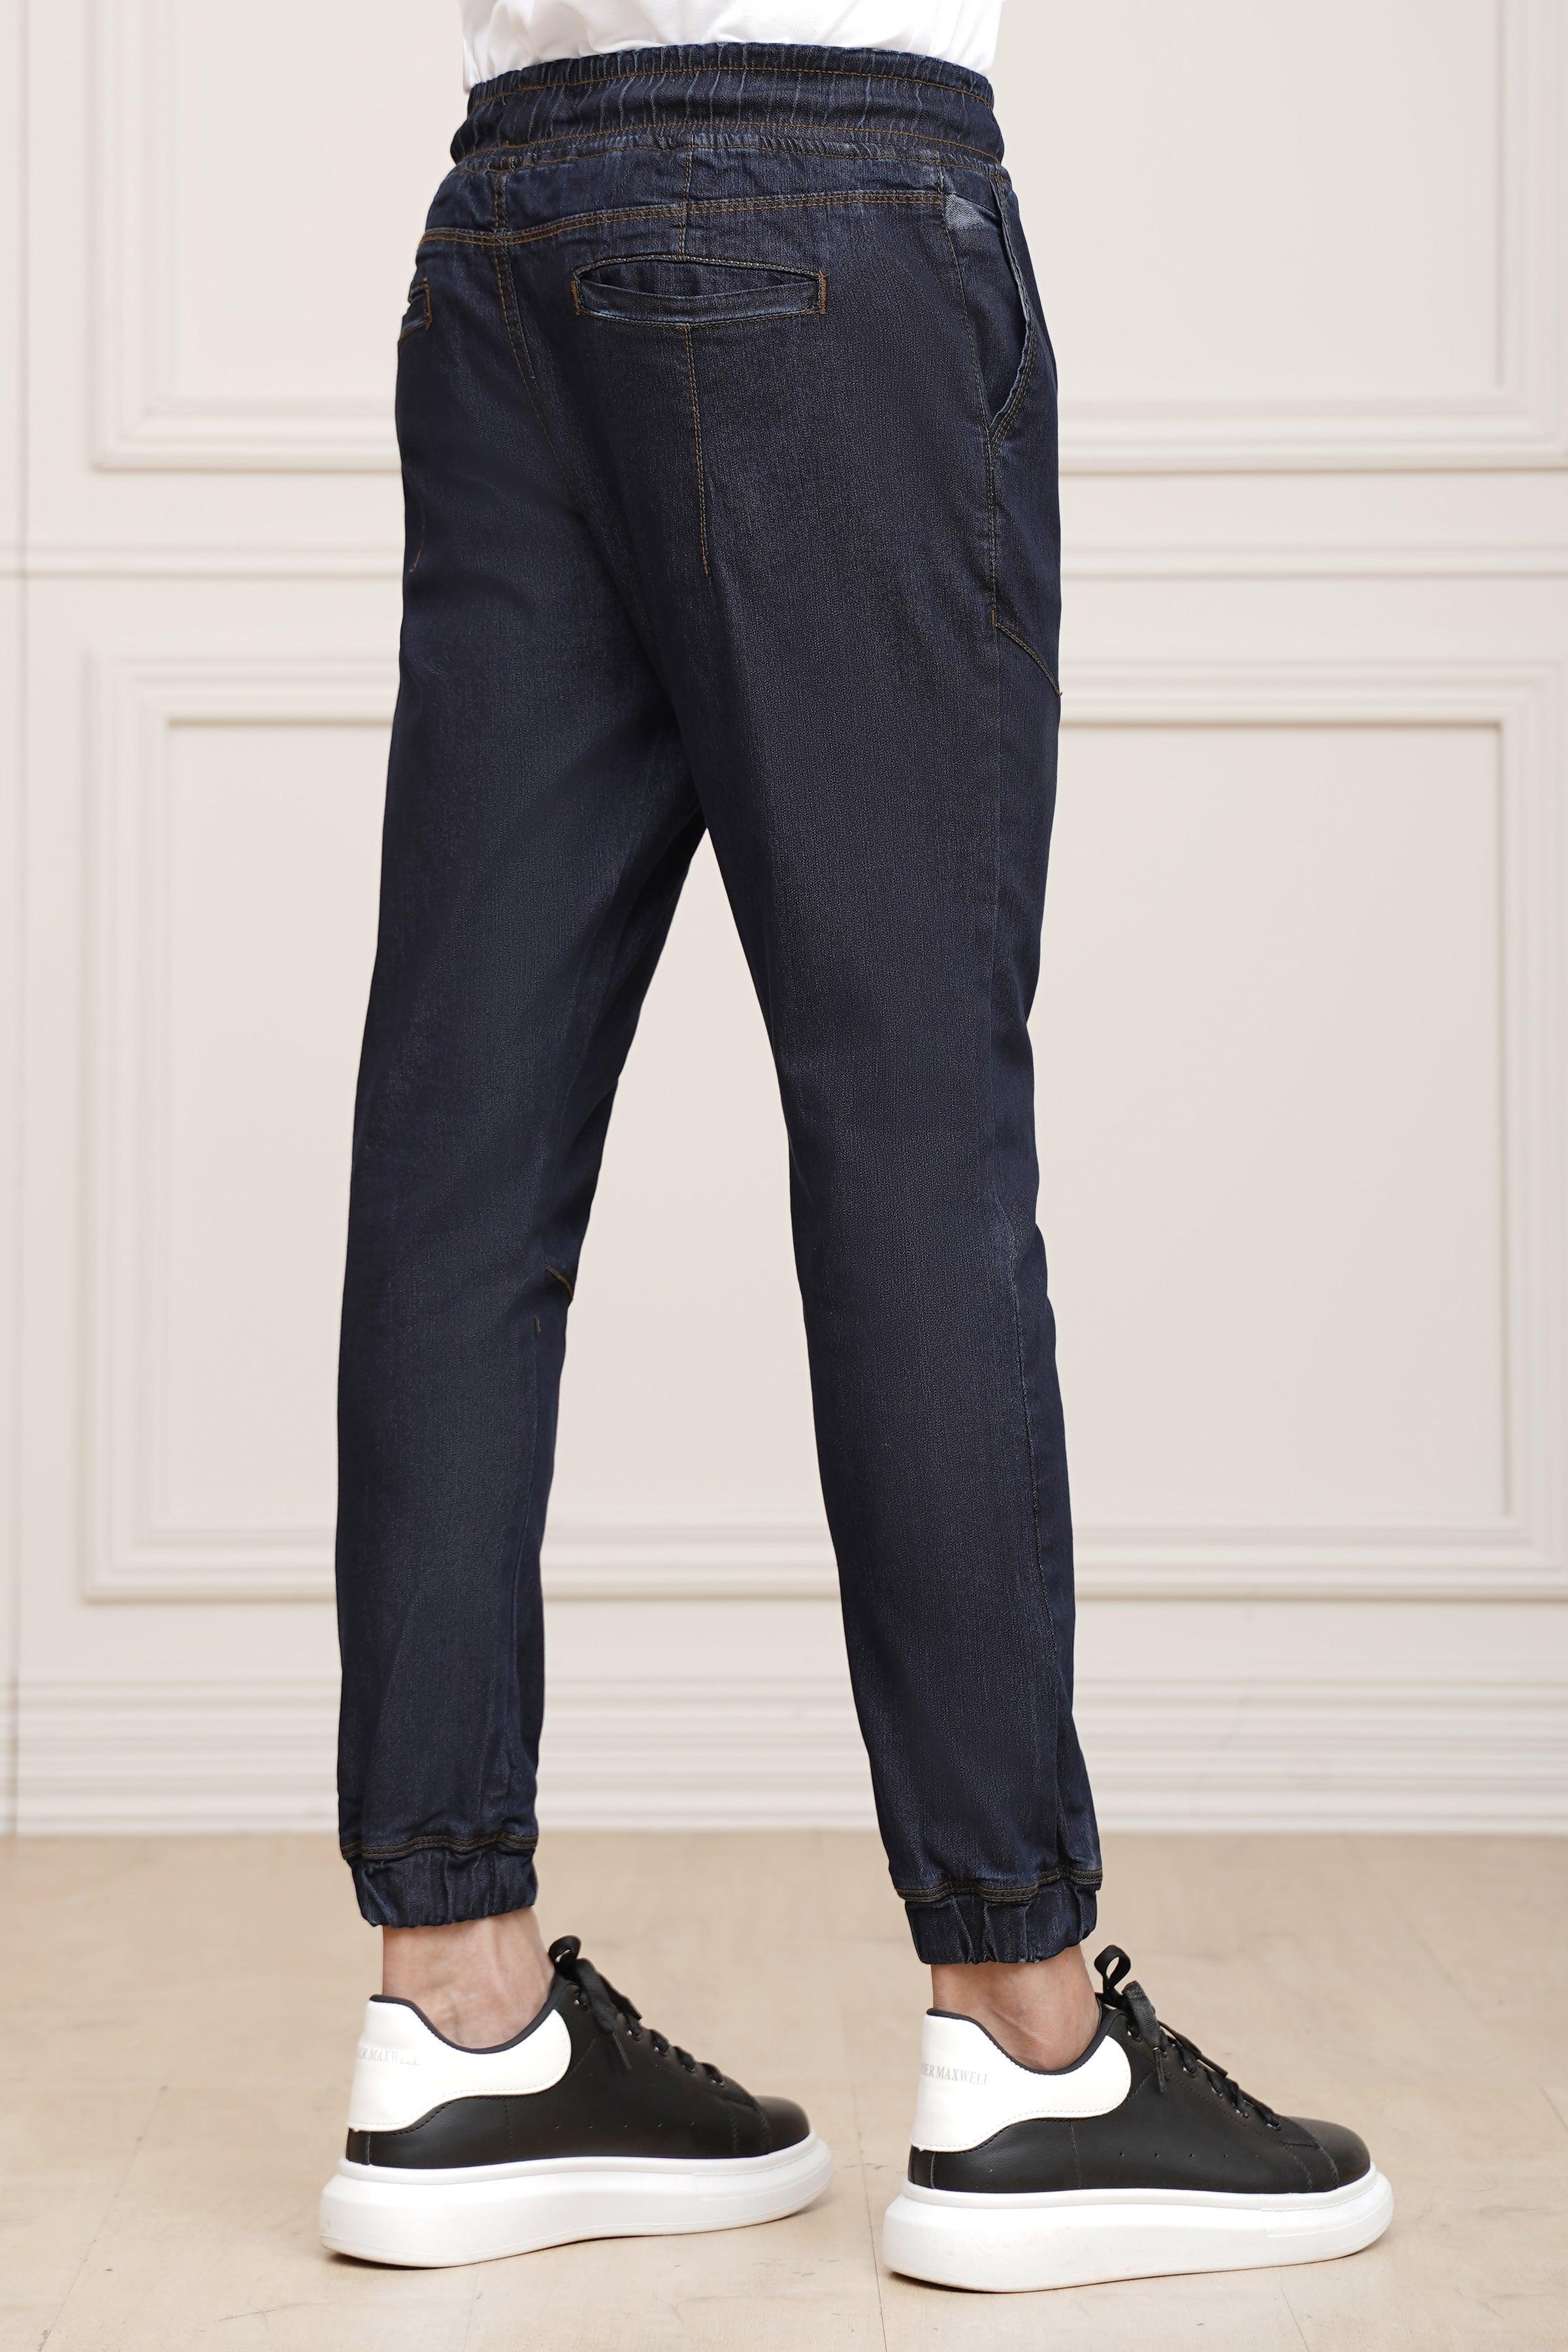 DENIM TROUSER NAVY BLUE at Charcoal Clothing